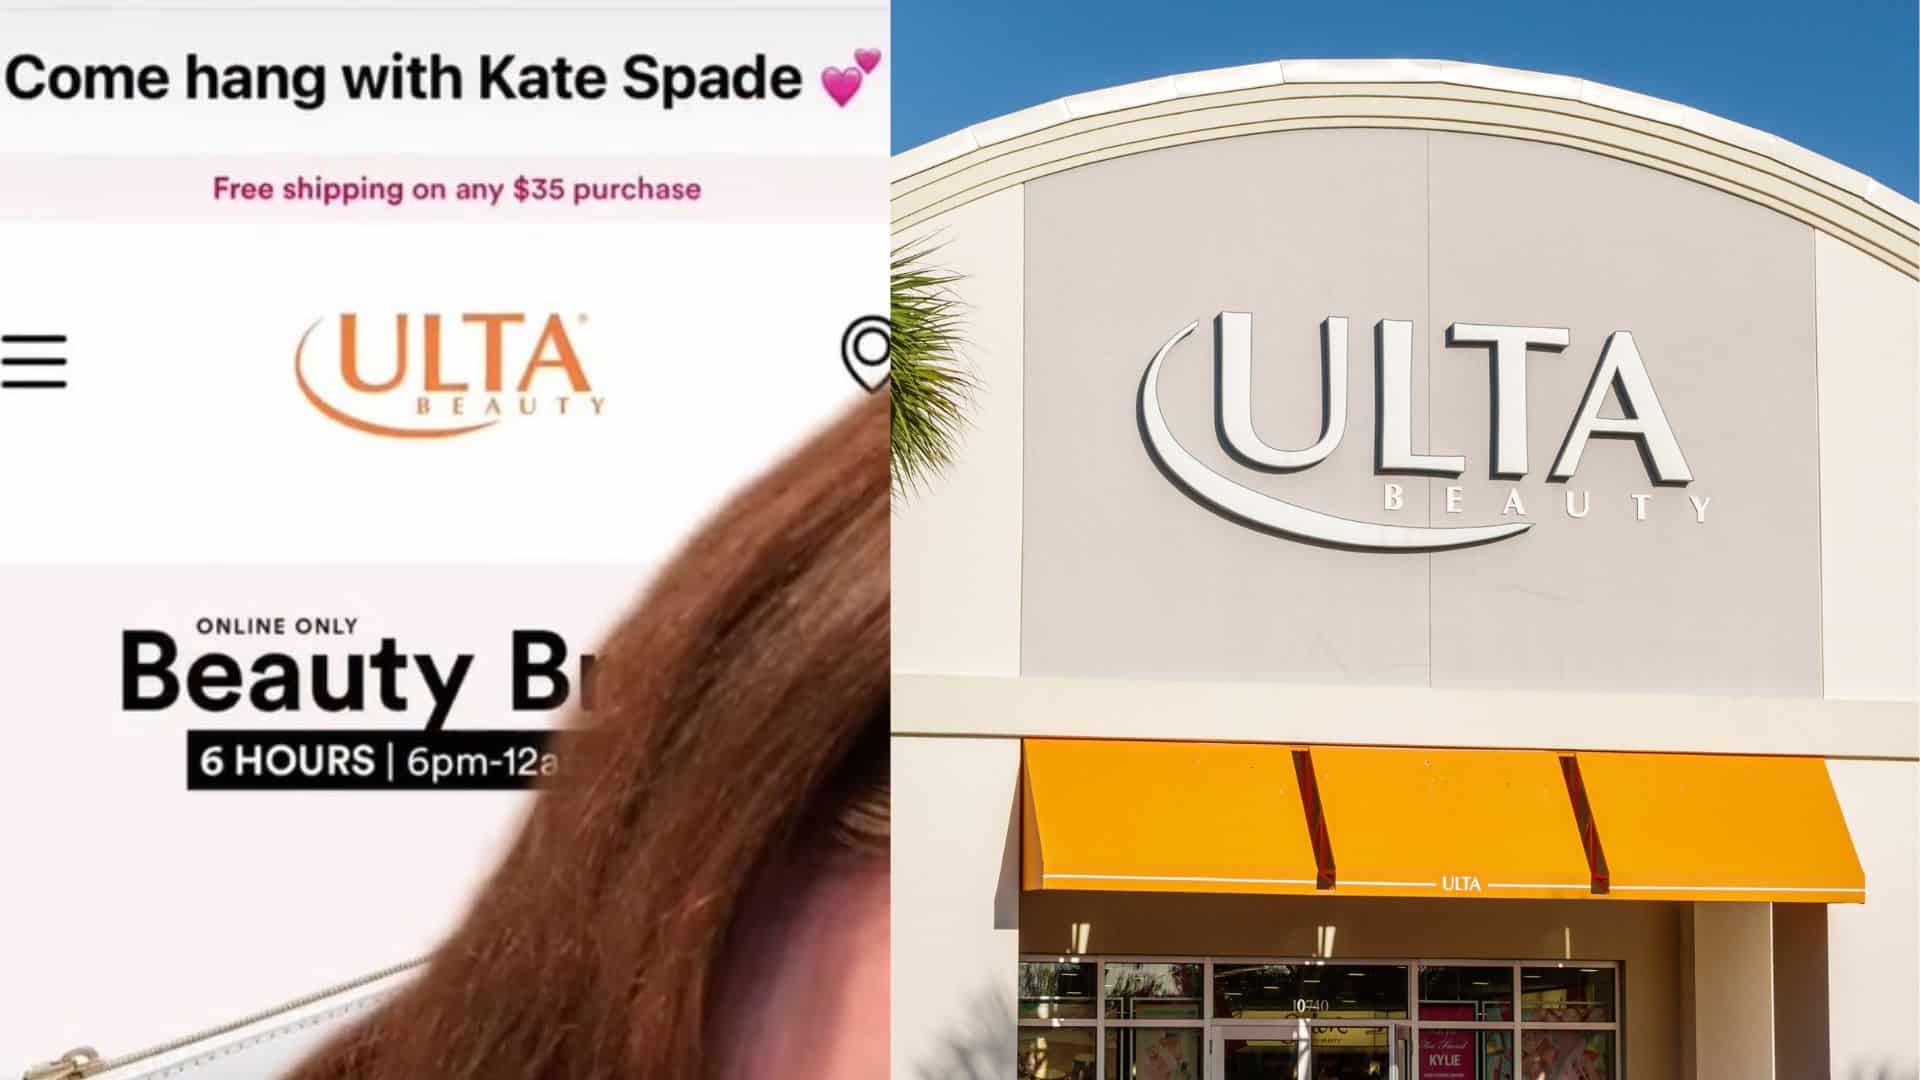 Ulta Issues Apologizing After Sending Insensitive Email about Kate Spade